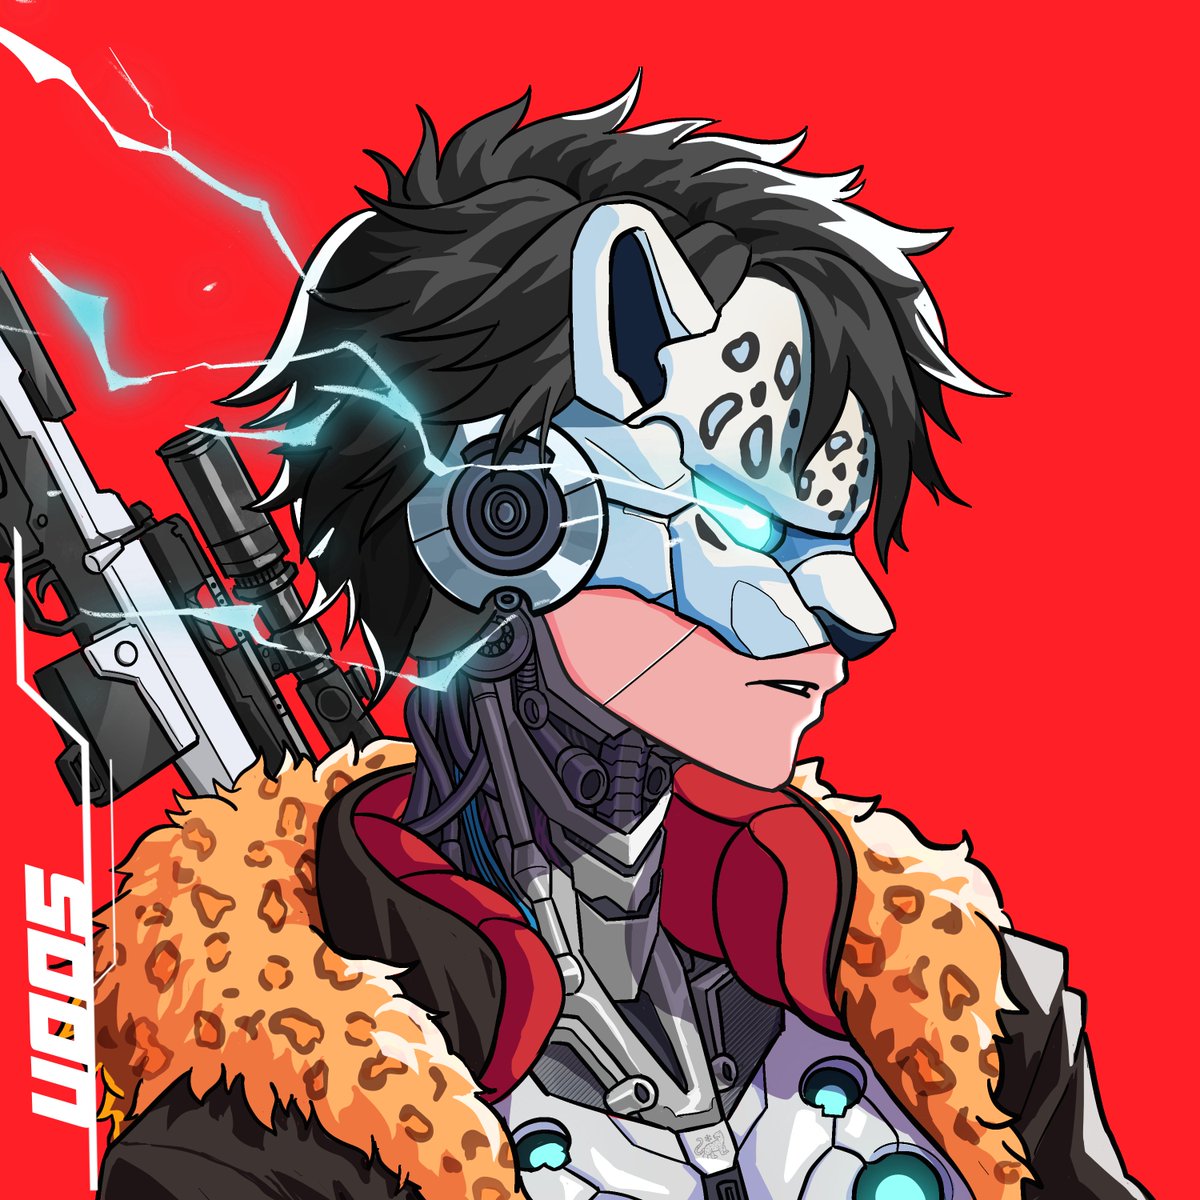 New Ice Leo PFP by @suji_pop💥 Story Time: Choosing the name Ice Leo was a pivotal moment in my crypto journey. At a time when my confidence wavered and success seemed fleeting, I realized I needed an anchor, something that reflected both my aspirations and my challenges. Much